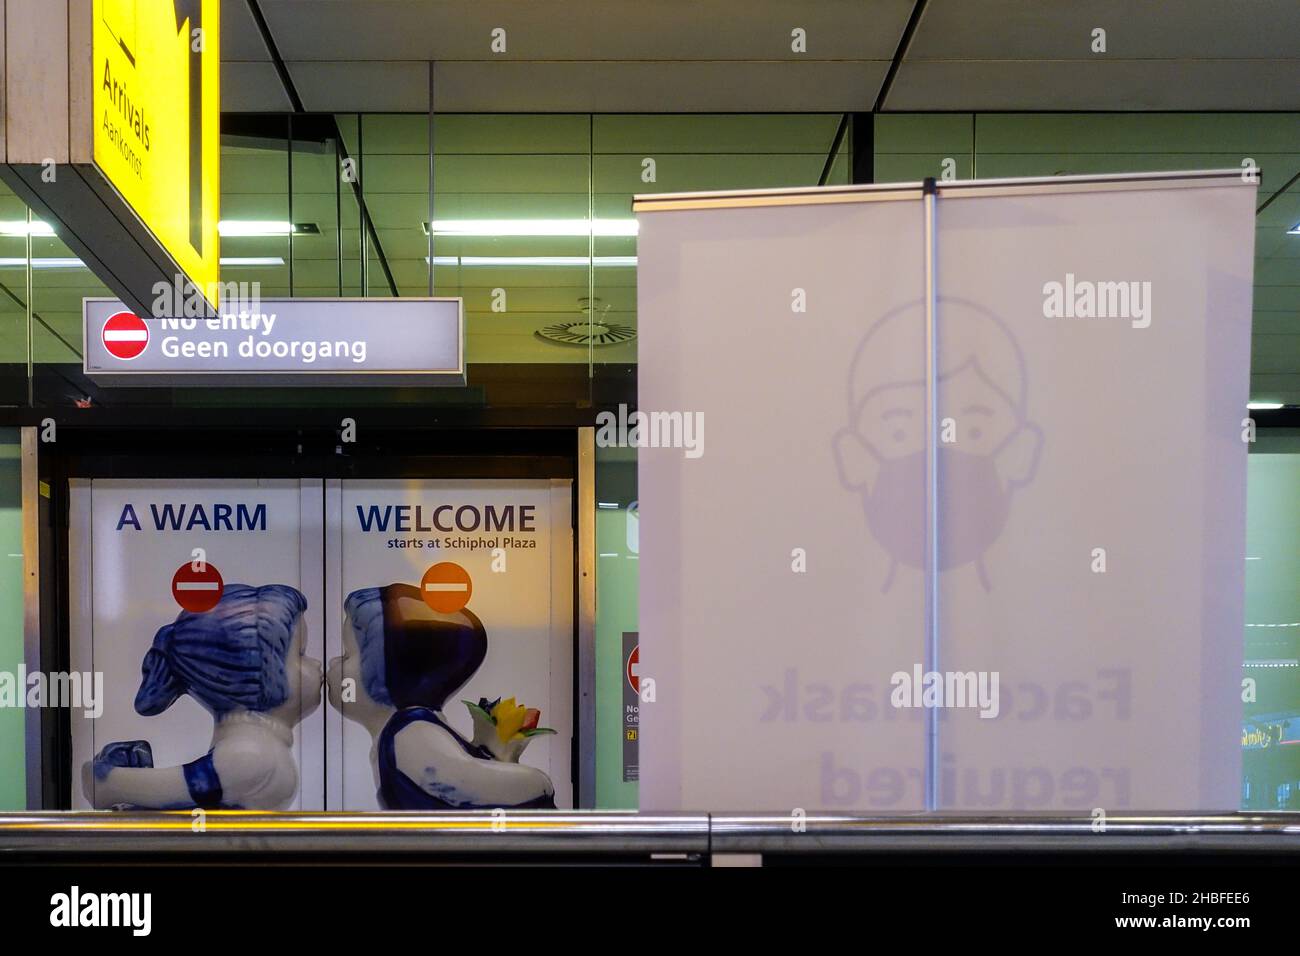 Schiphol International Airport, Amsterdam, Netherlands: 'A warm welcome' sign with kissing figures, with a sign inviting to wear a mask Stock Photo